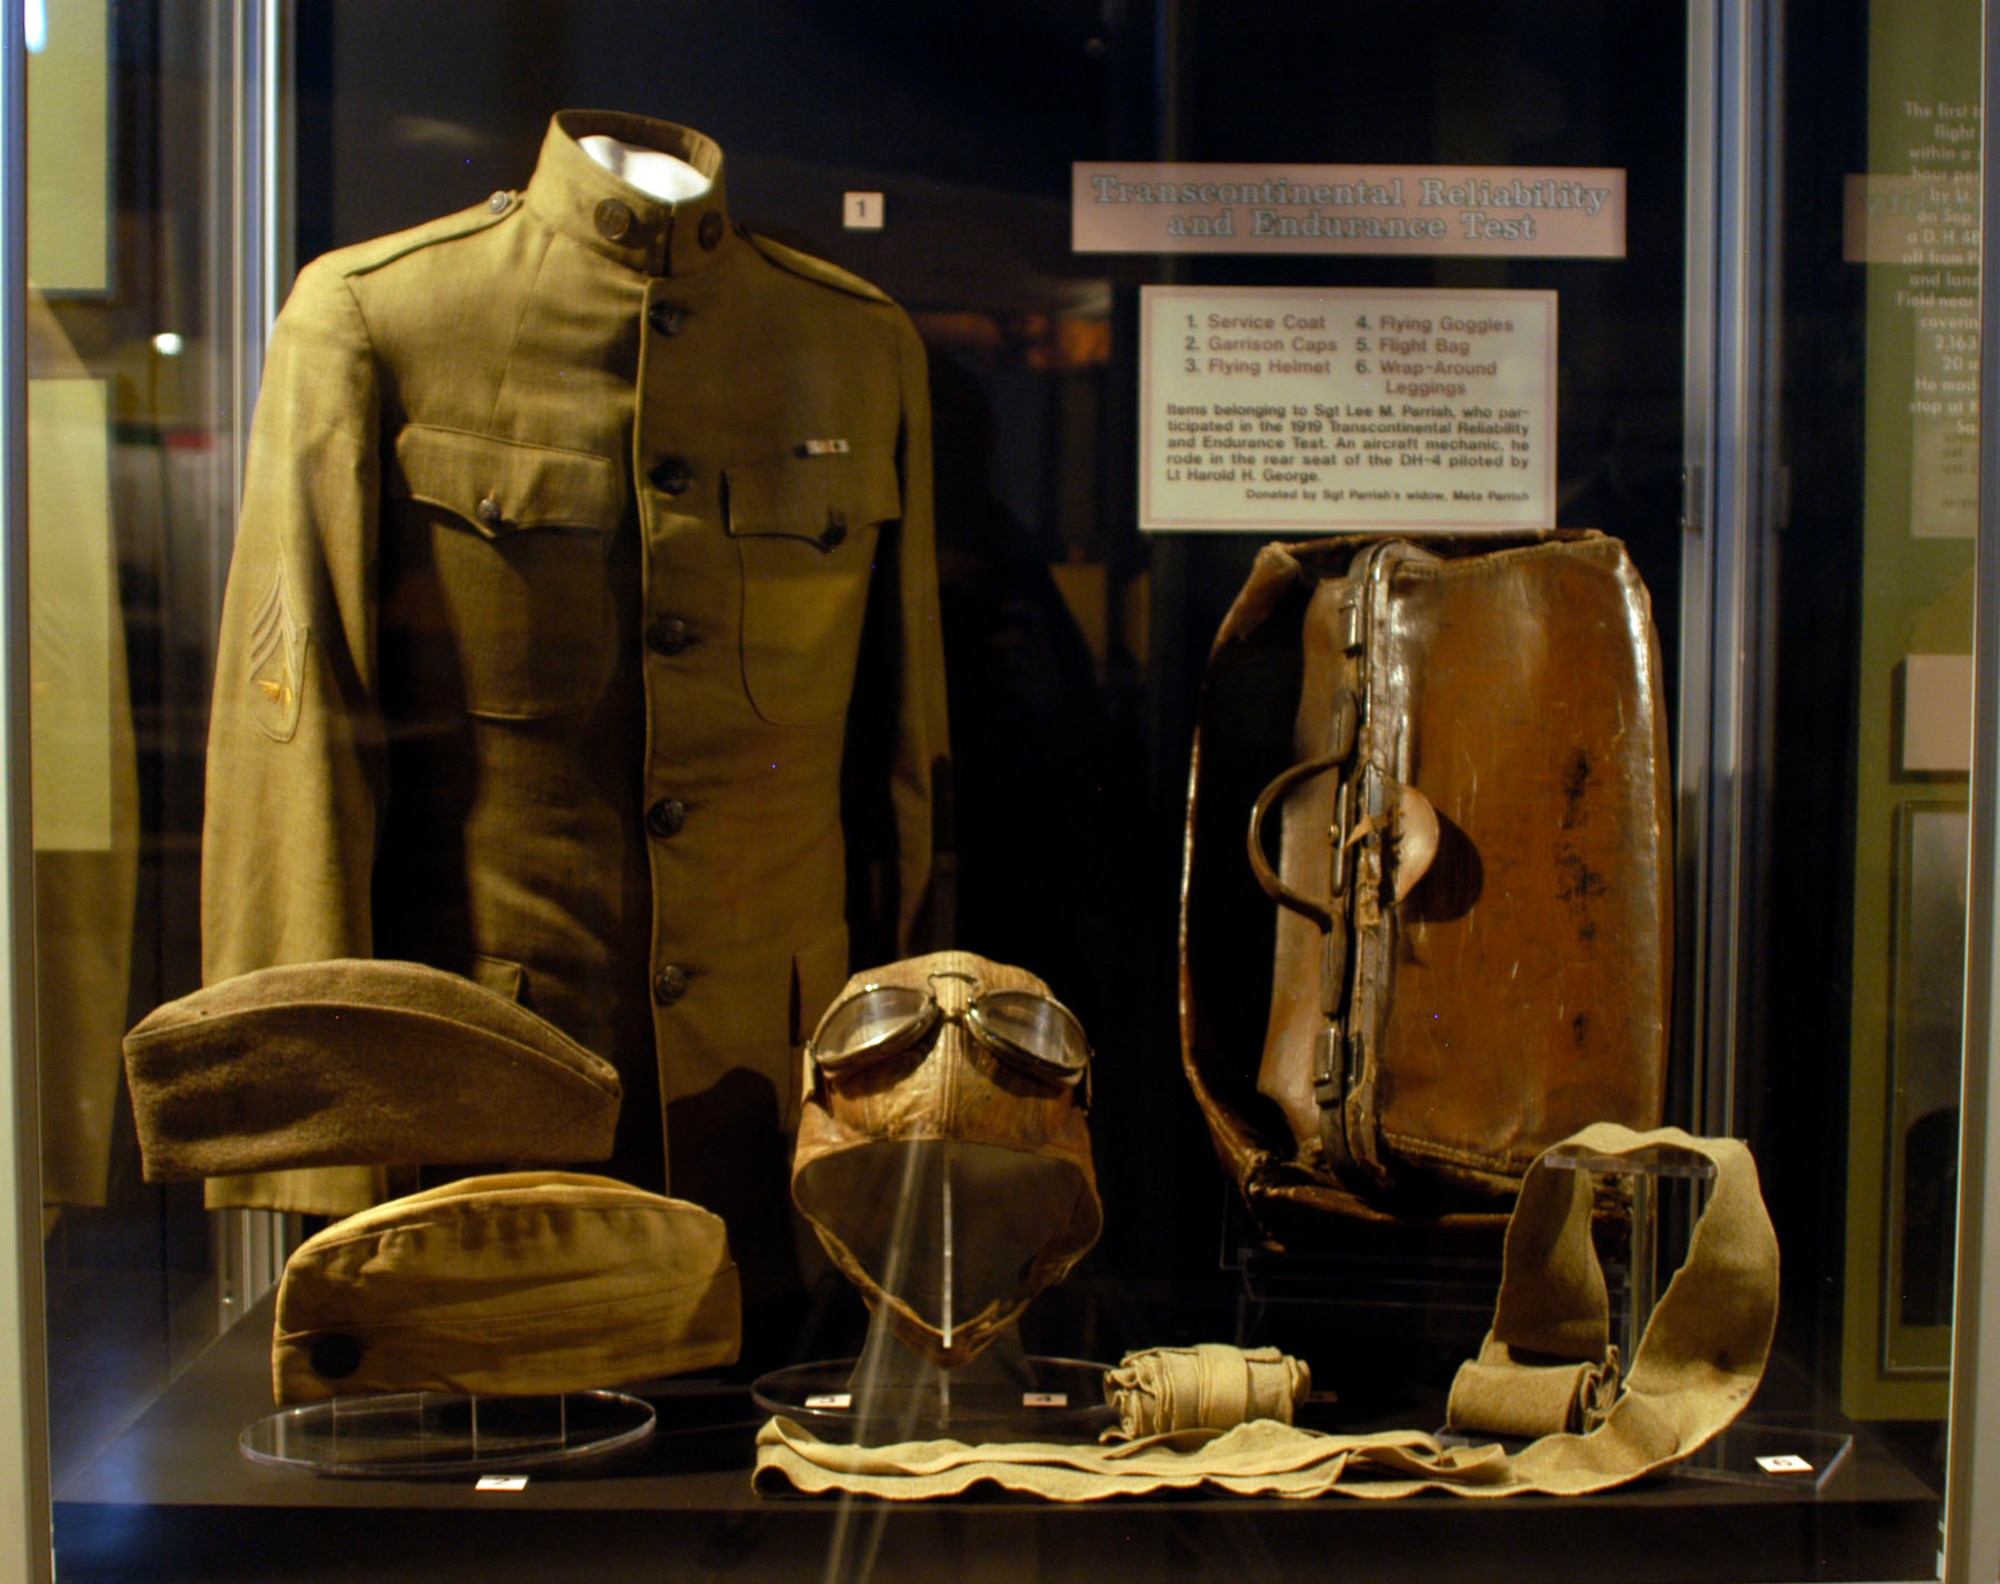 DAYTON, Ohio -- Items from Sgt. Lee M. Parrish who participated in the 1919 Transcontinental Reliability and Endurance Test are on display in the Early Years Gallery at the National Museum of the United States Air Force. Parrish flew in the rear seat of the DH-4 piloted by Lt. Harold H. George and served as the airplane's mechanic. The items were donated by Sgt. Parrish's widow, Mrs. Neta Parrish. (U.S. Air Force photo)